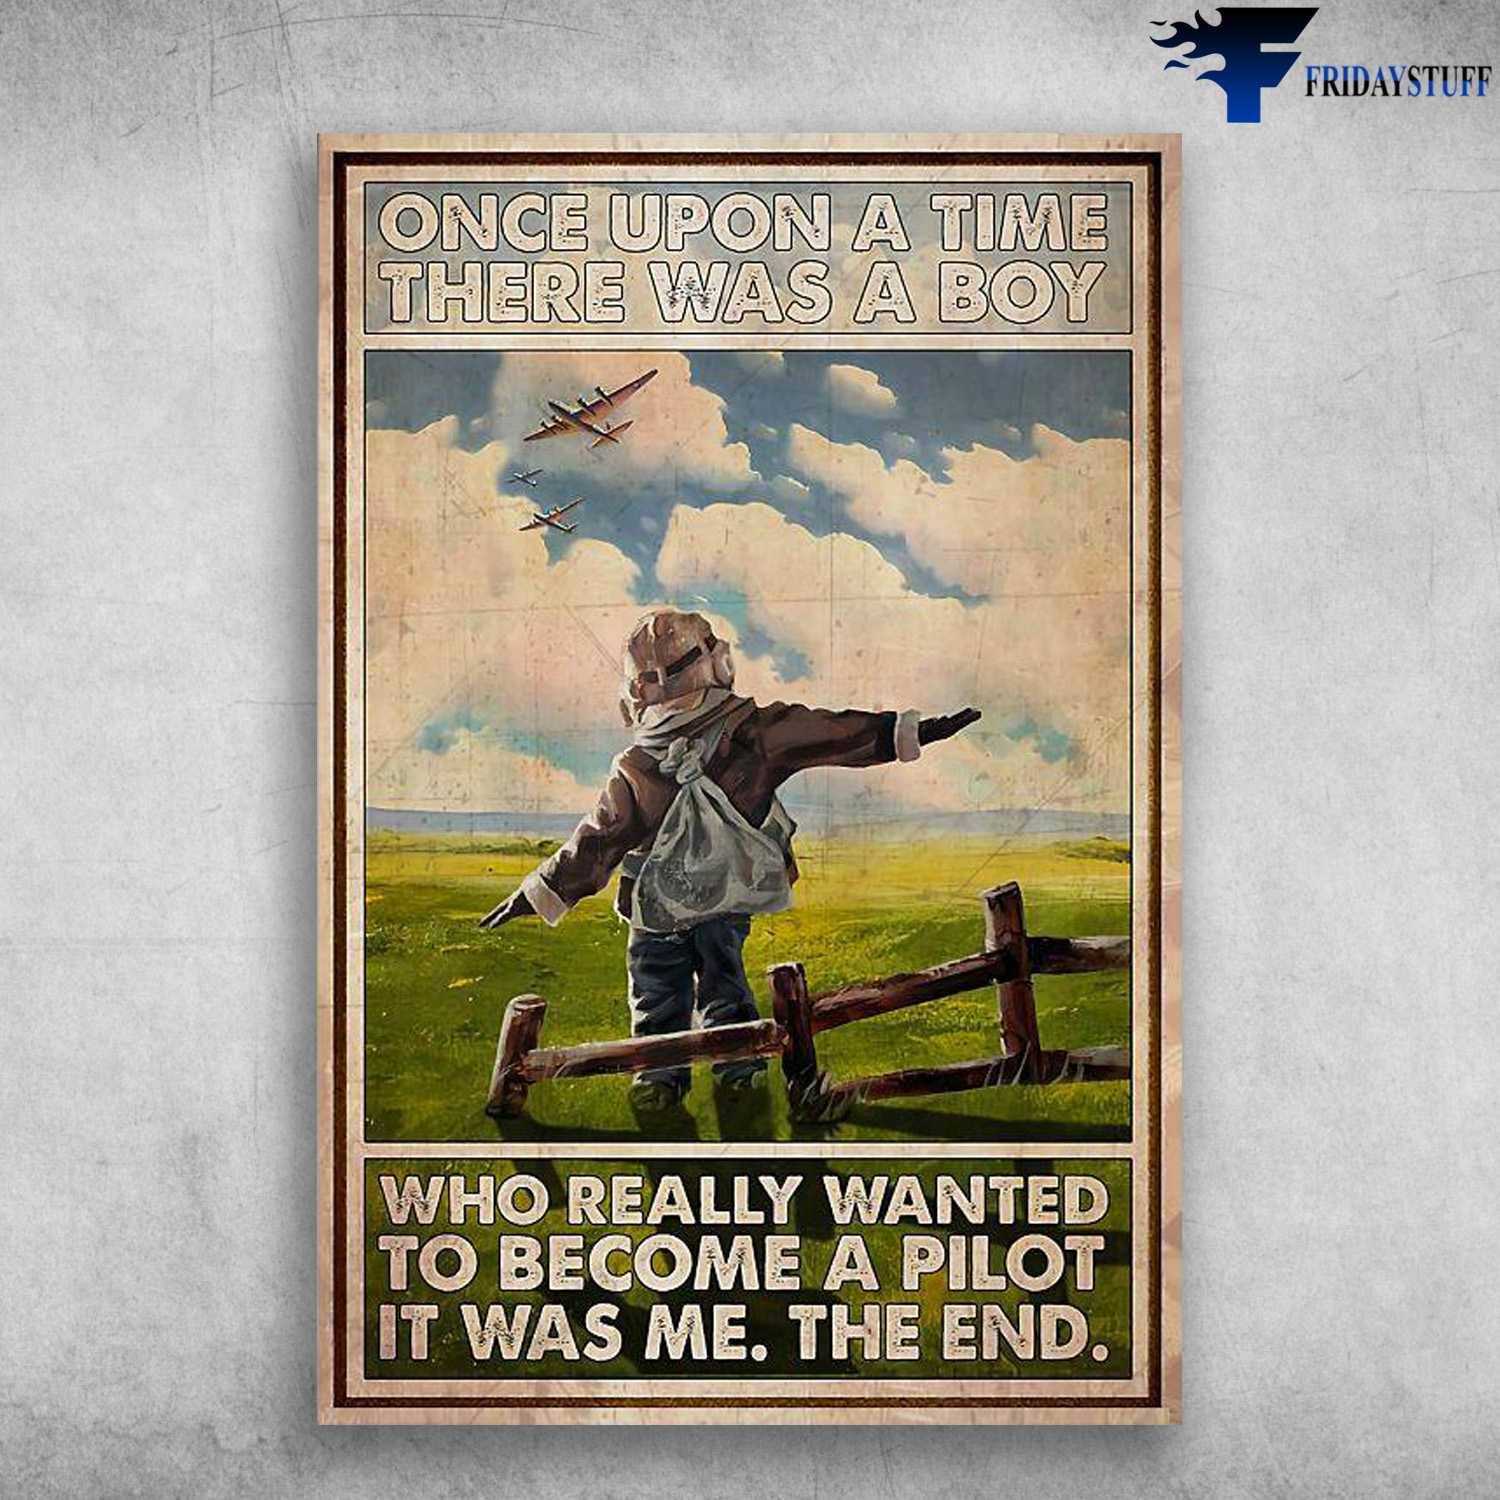 Pilot Gift, Pilot Poster, Pilot Boy, Once Upon A Time, There Was A Boy, Who Really Wanted To Become A Pilot, It Was Me, The End